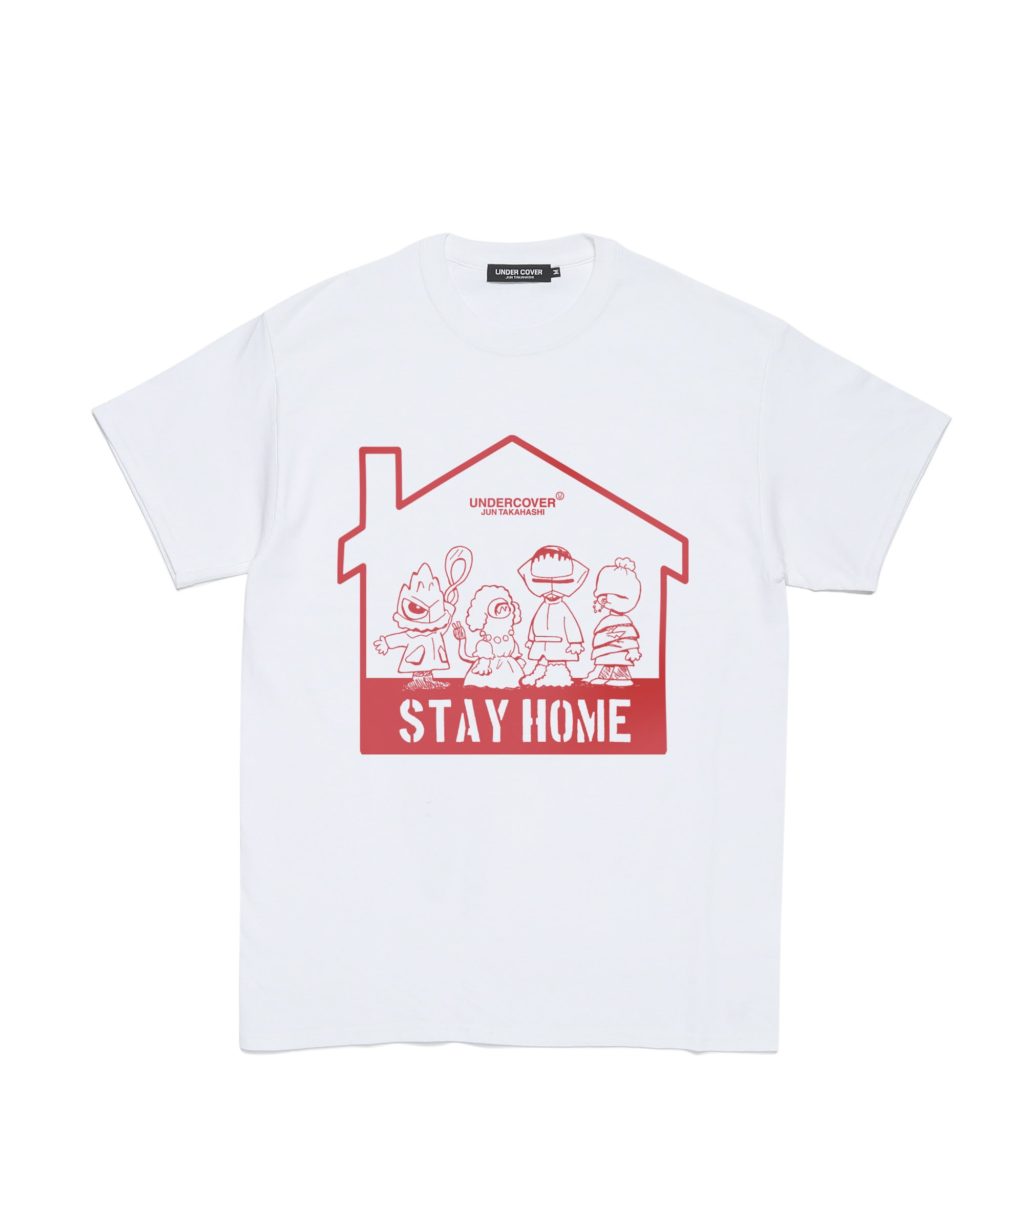 undercover-stay-home-t-shirt-release-20200417